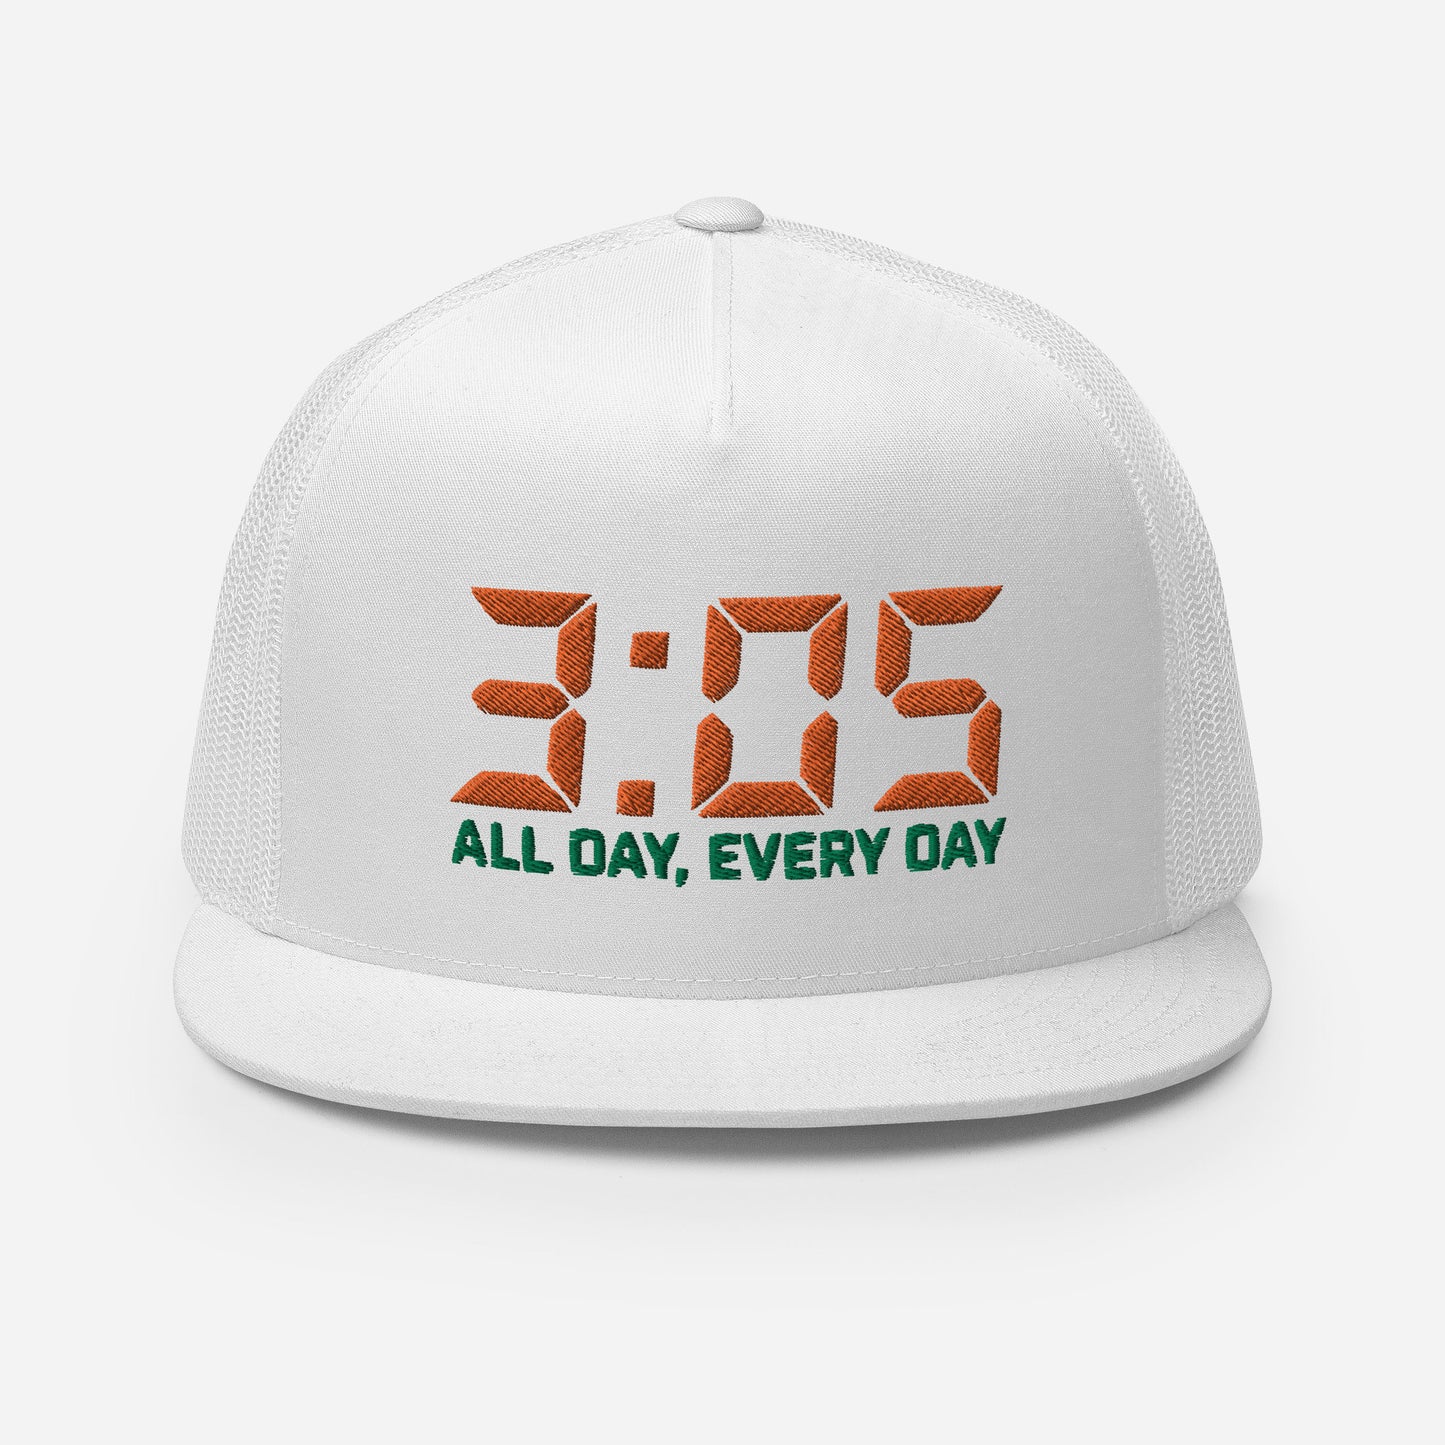 3:05 All Day, Every Day Hat - Designed by Jas